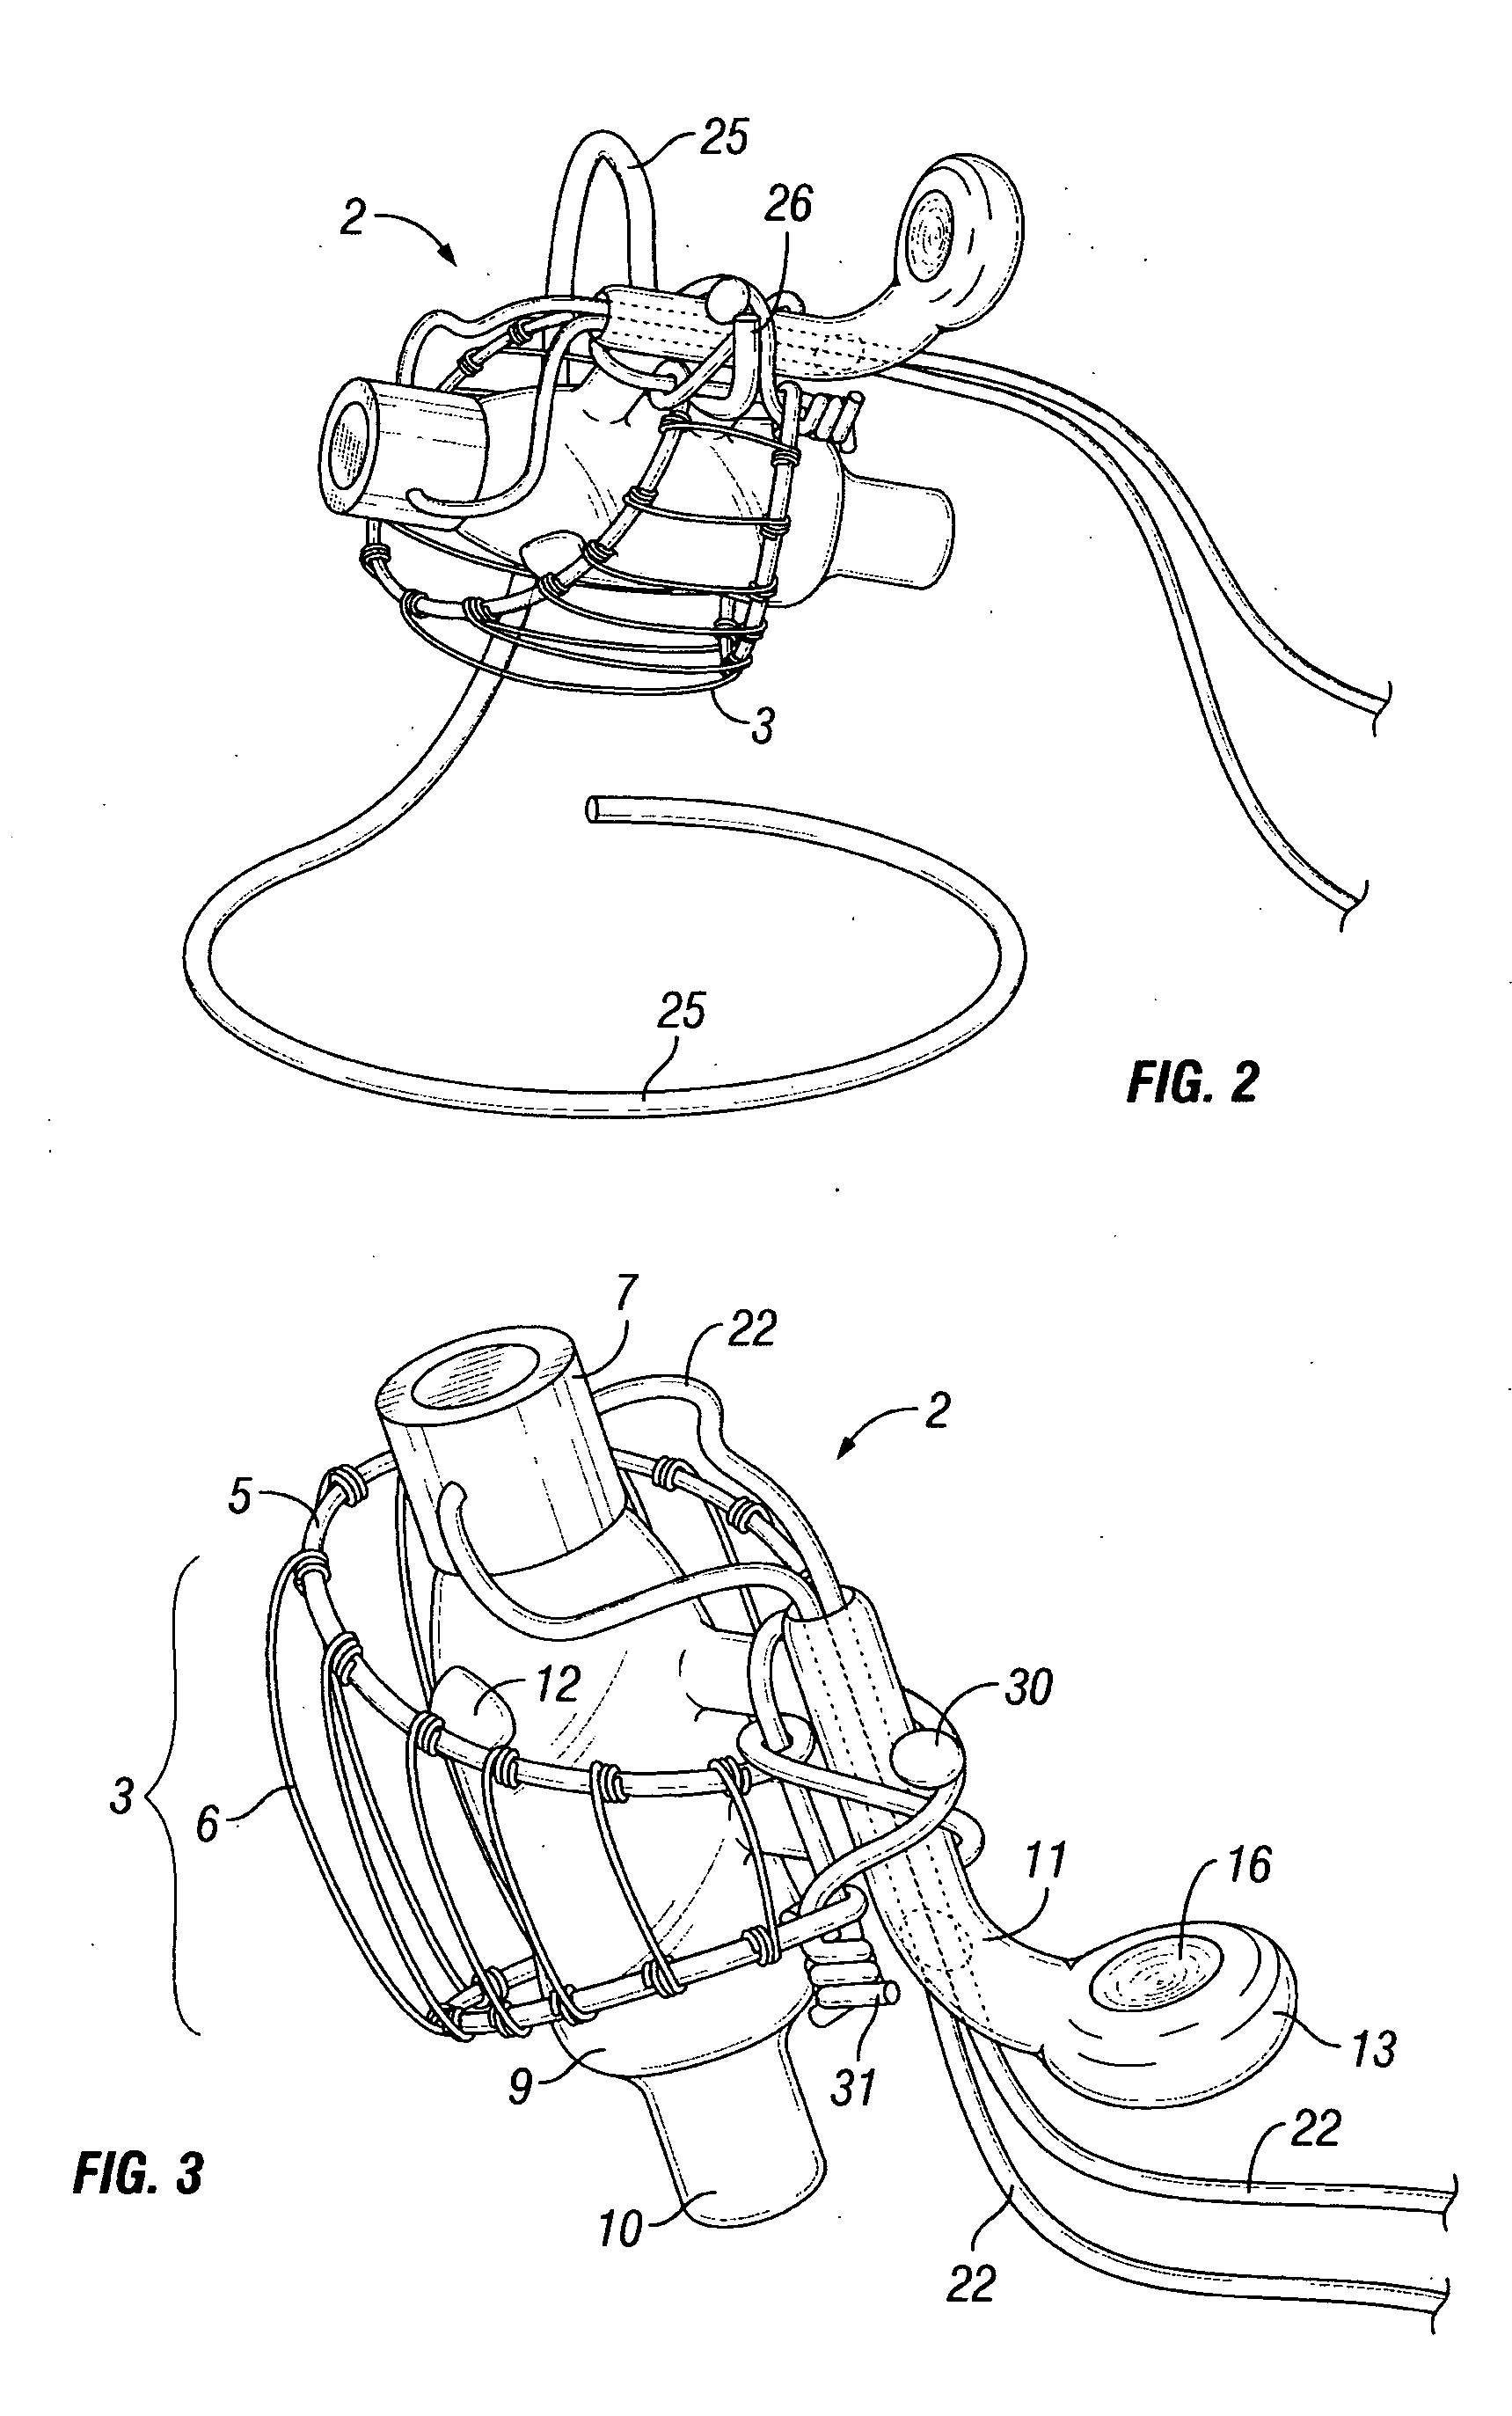 Tobacco vaporizer and related water pipe system